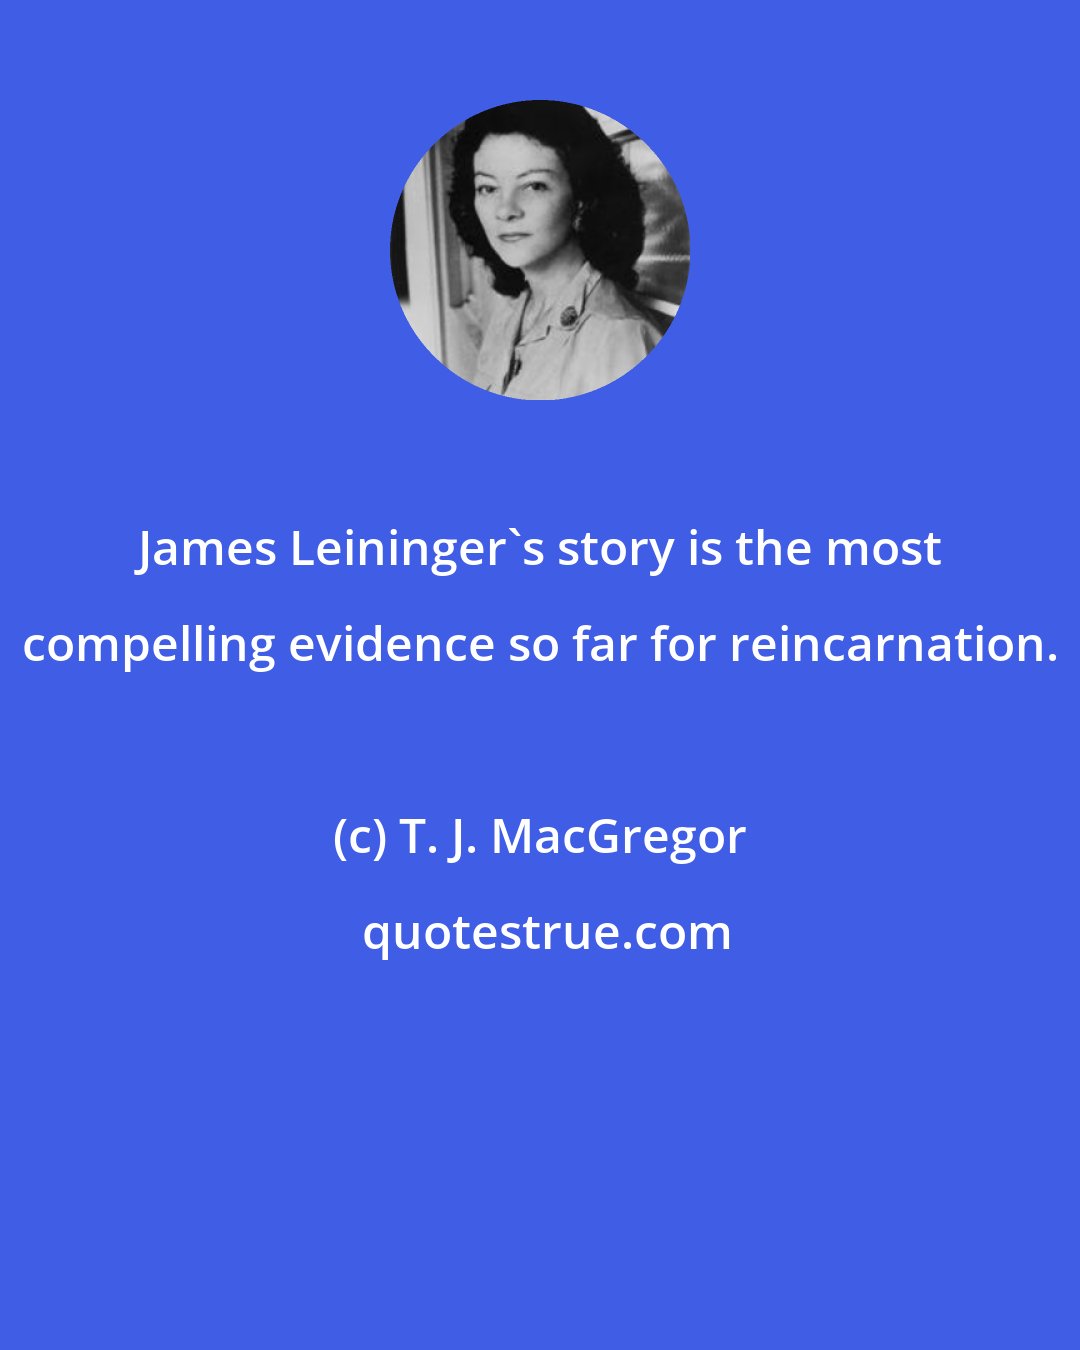 T. J. MacGregor: James Leininger's story is the most compelling evidence so far for reincarnation.